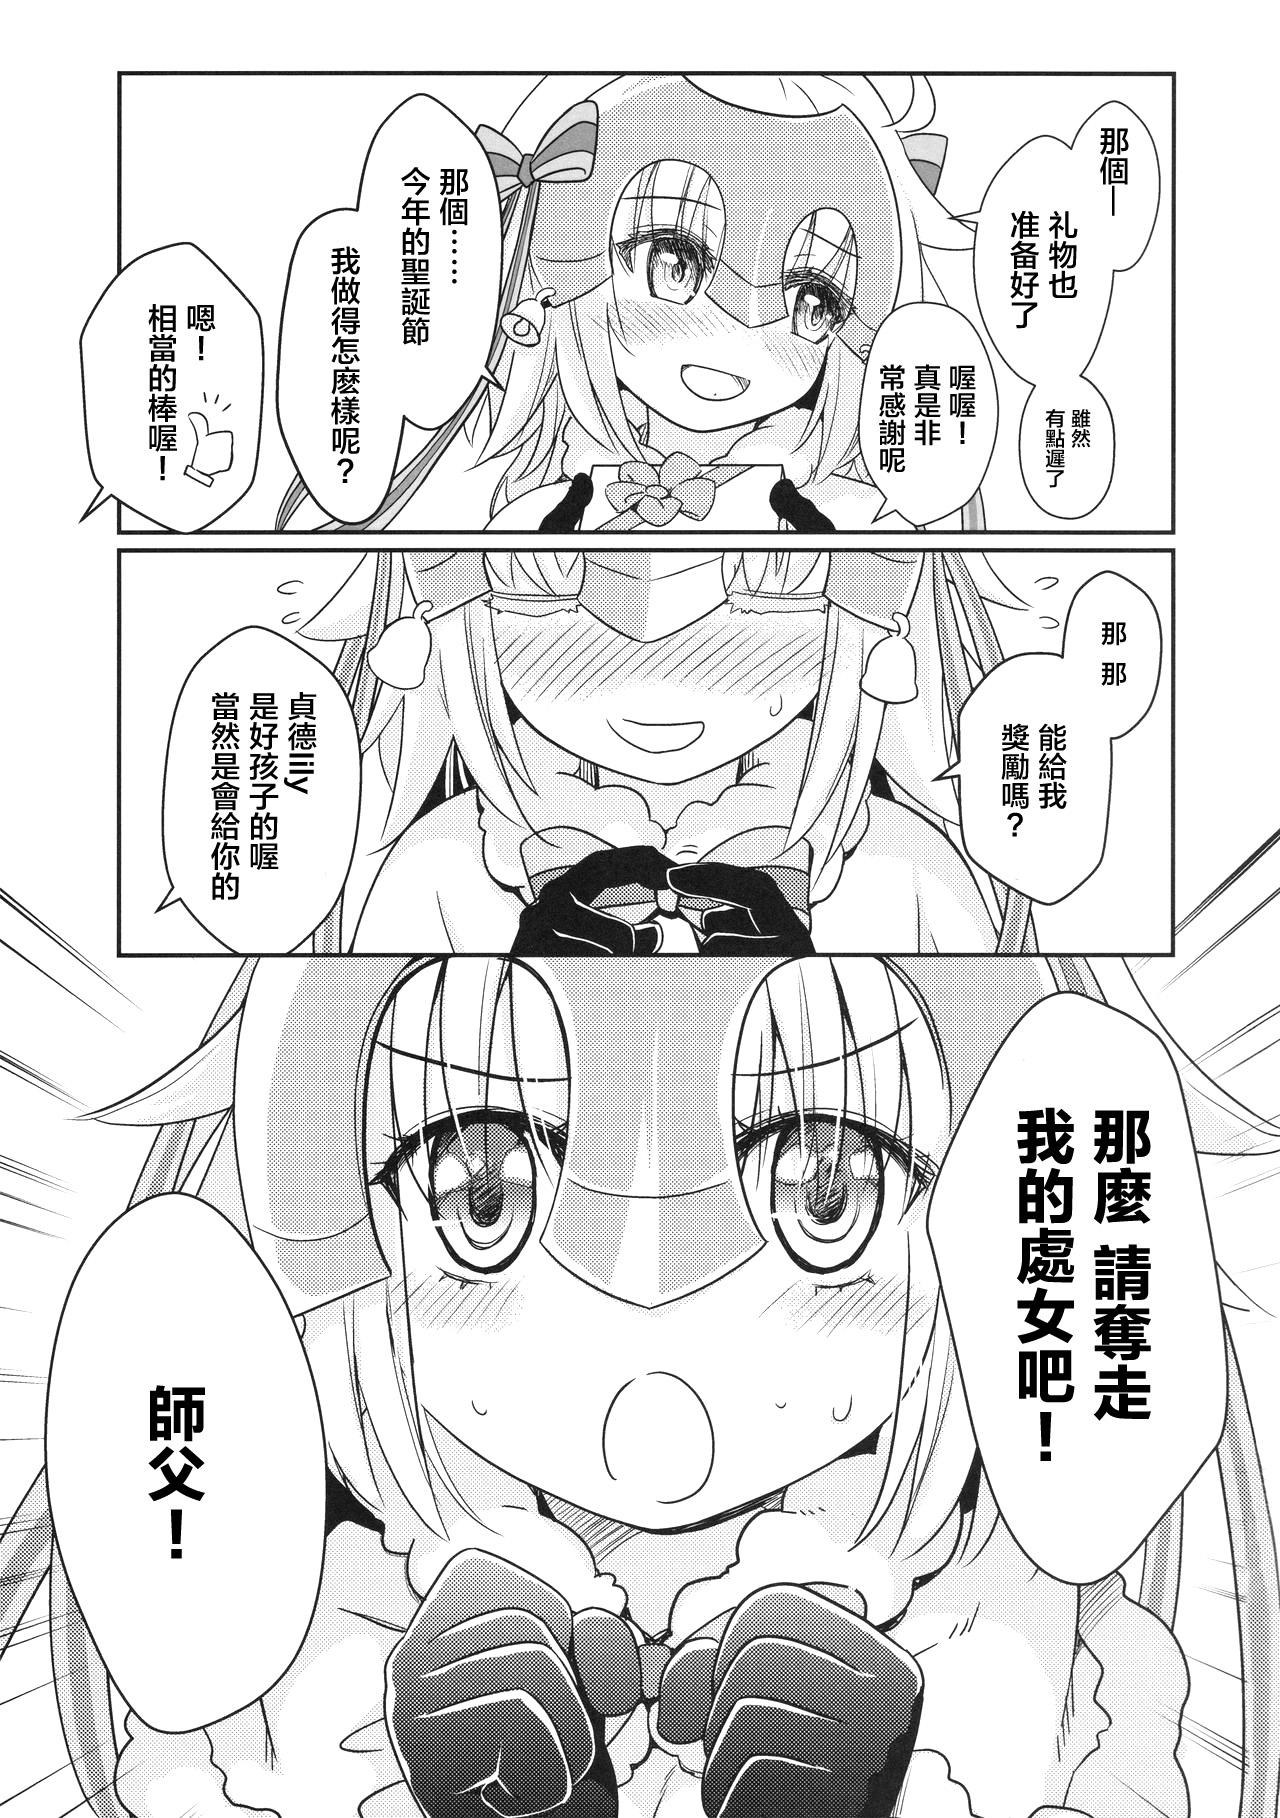 Gapes Gaping Asshole Jeanne Lily wa Yoiko? - Fate grand order Tattooed - Page 3